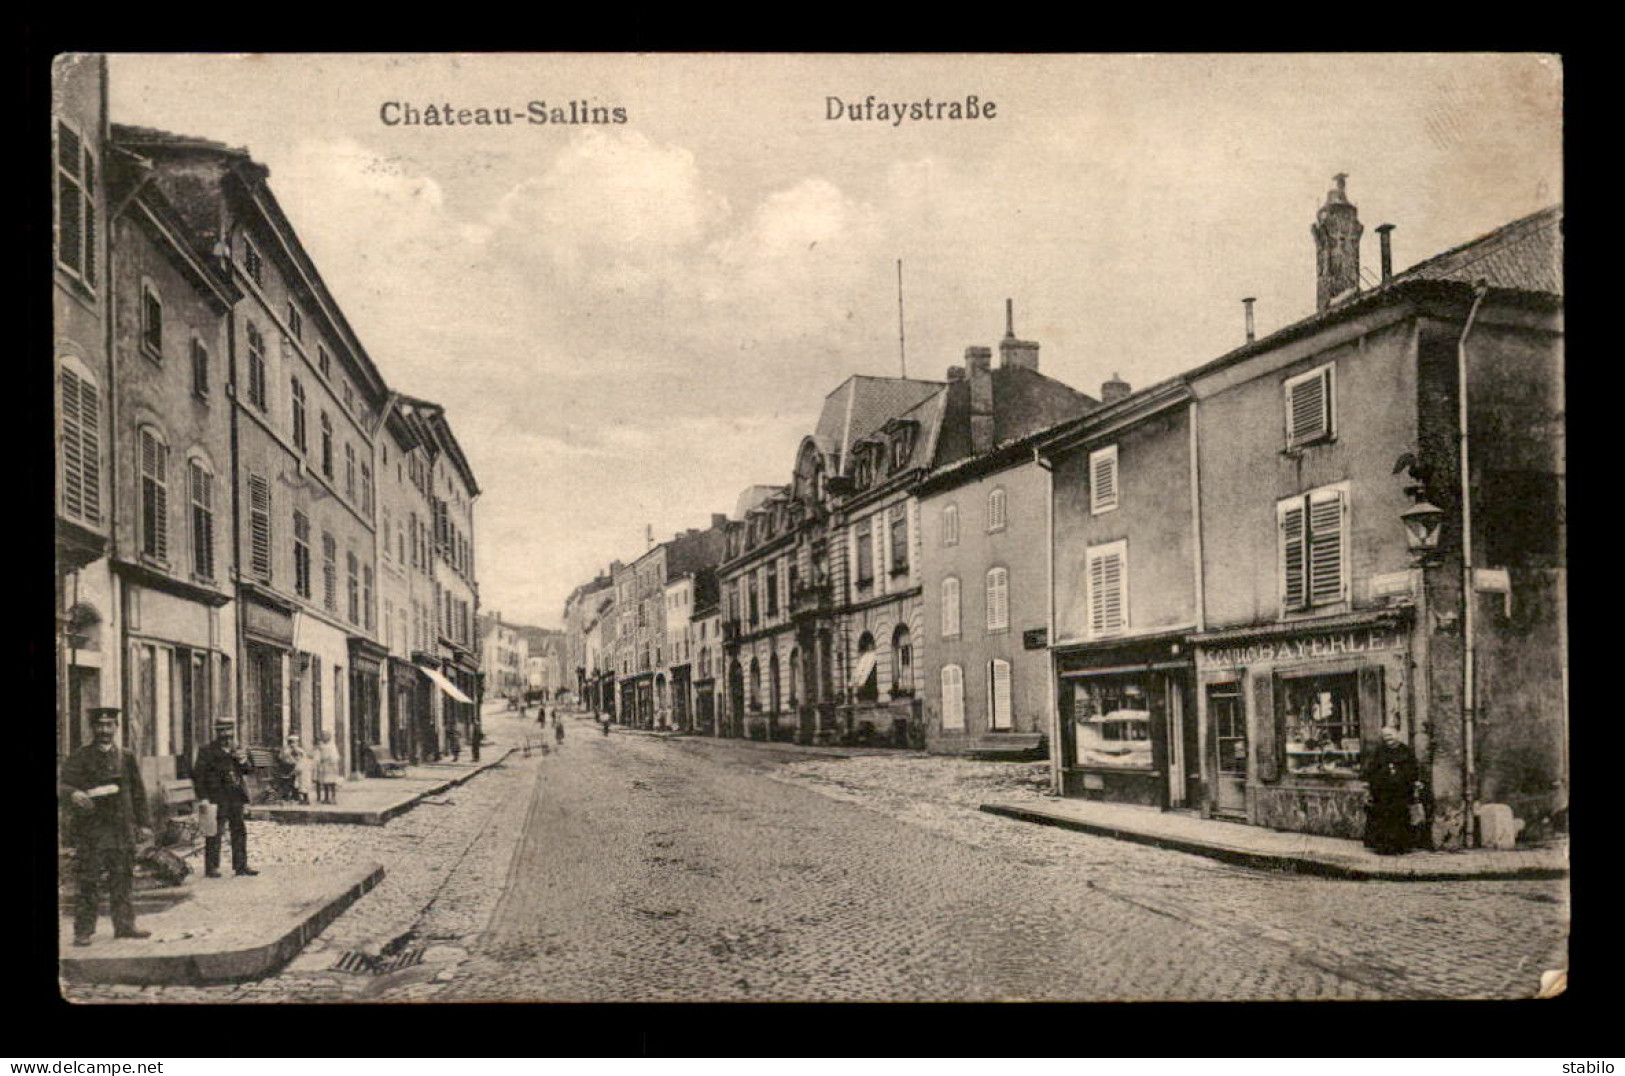 57 - CHATEAU SALINS - DUFAYSTRASSE - MAGASIN LEONE BAYERLET - Chateau Salins